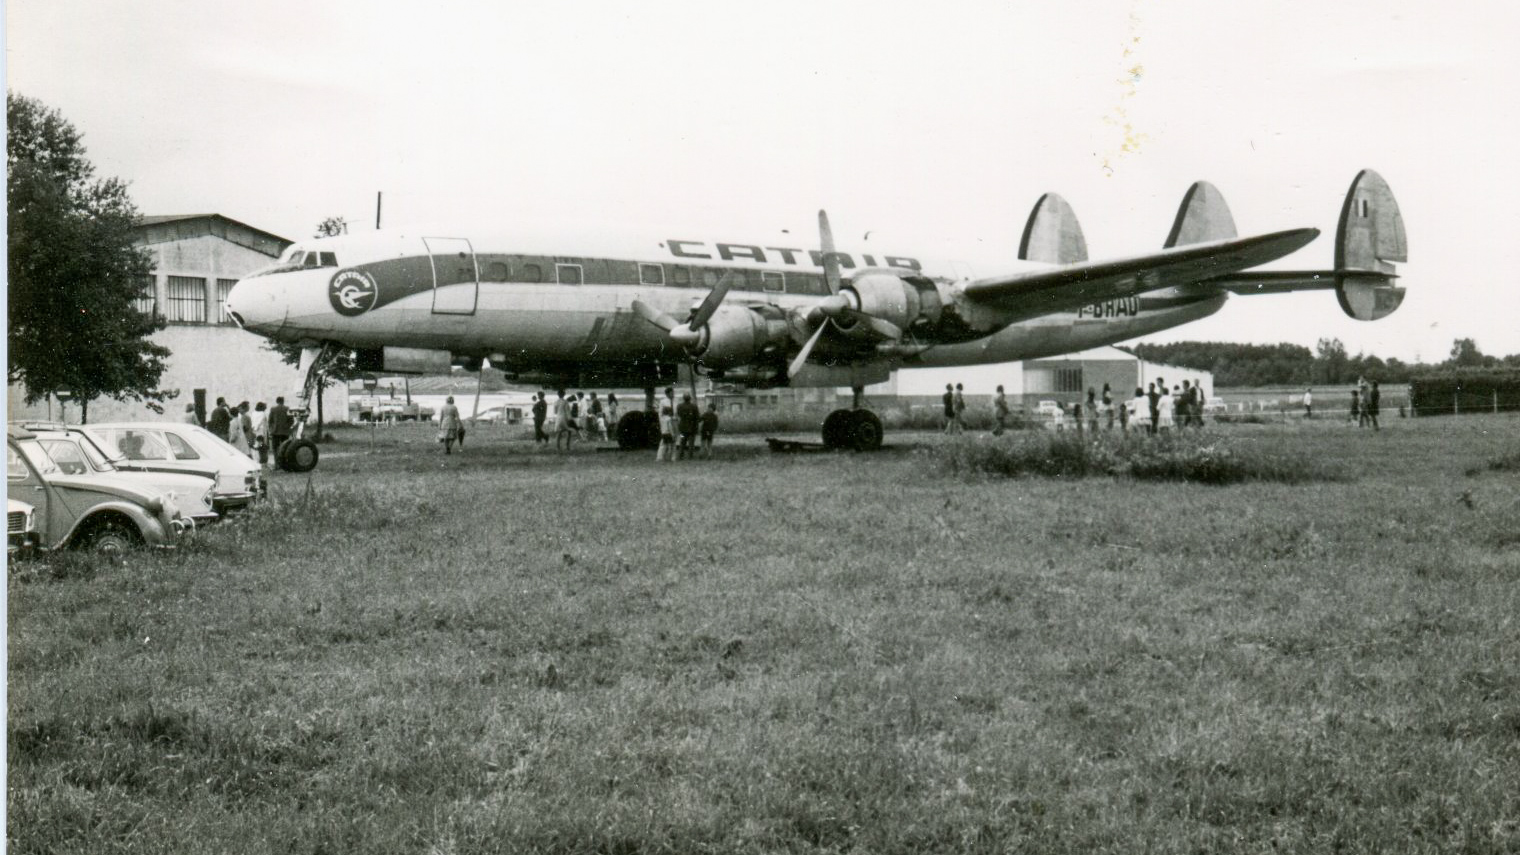 One of the first photos of F-BGNJ at Château Bougon